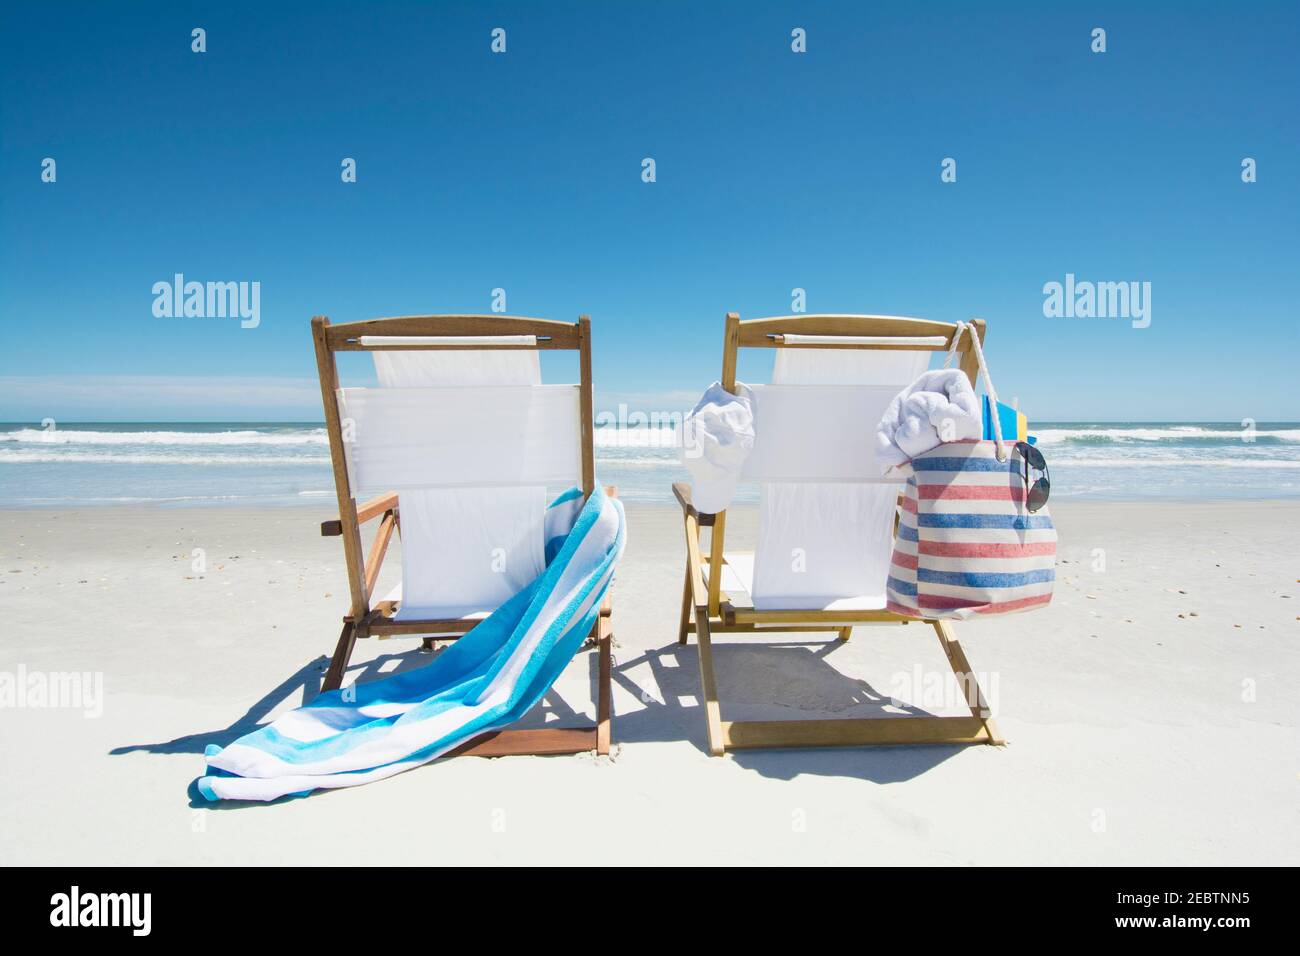 Canvas chairs on beach Stock Photo